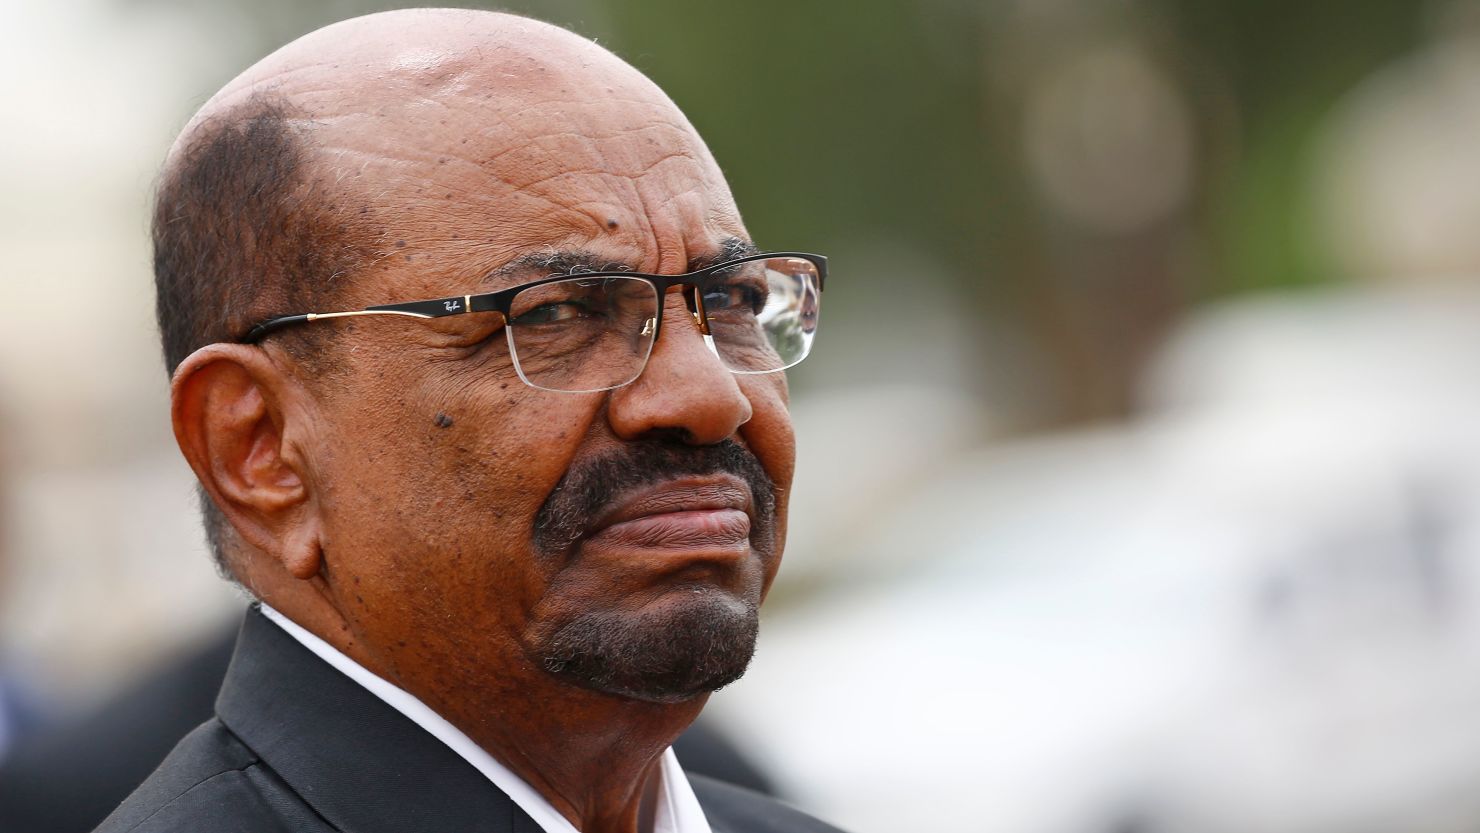 Former Sudanese President Omar al-Bashir, who has been moved to the maximum-security Kober prison, is seen in Khartoum in October 2018.